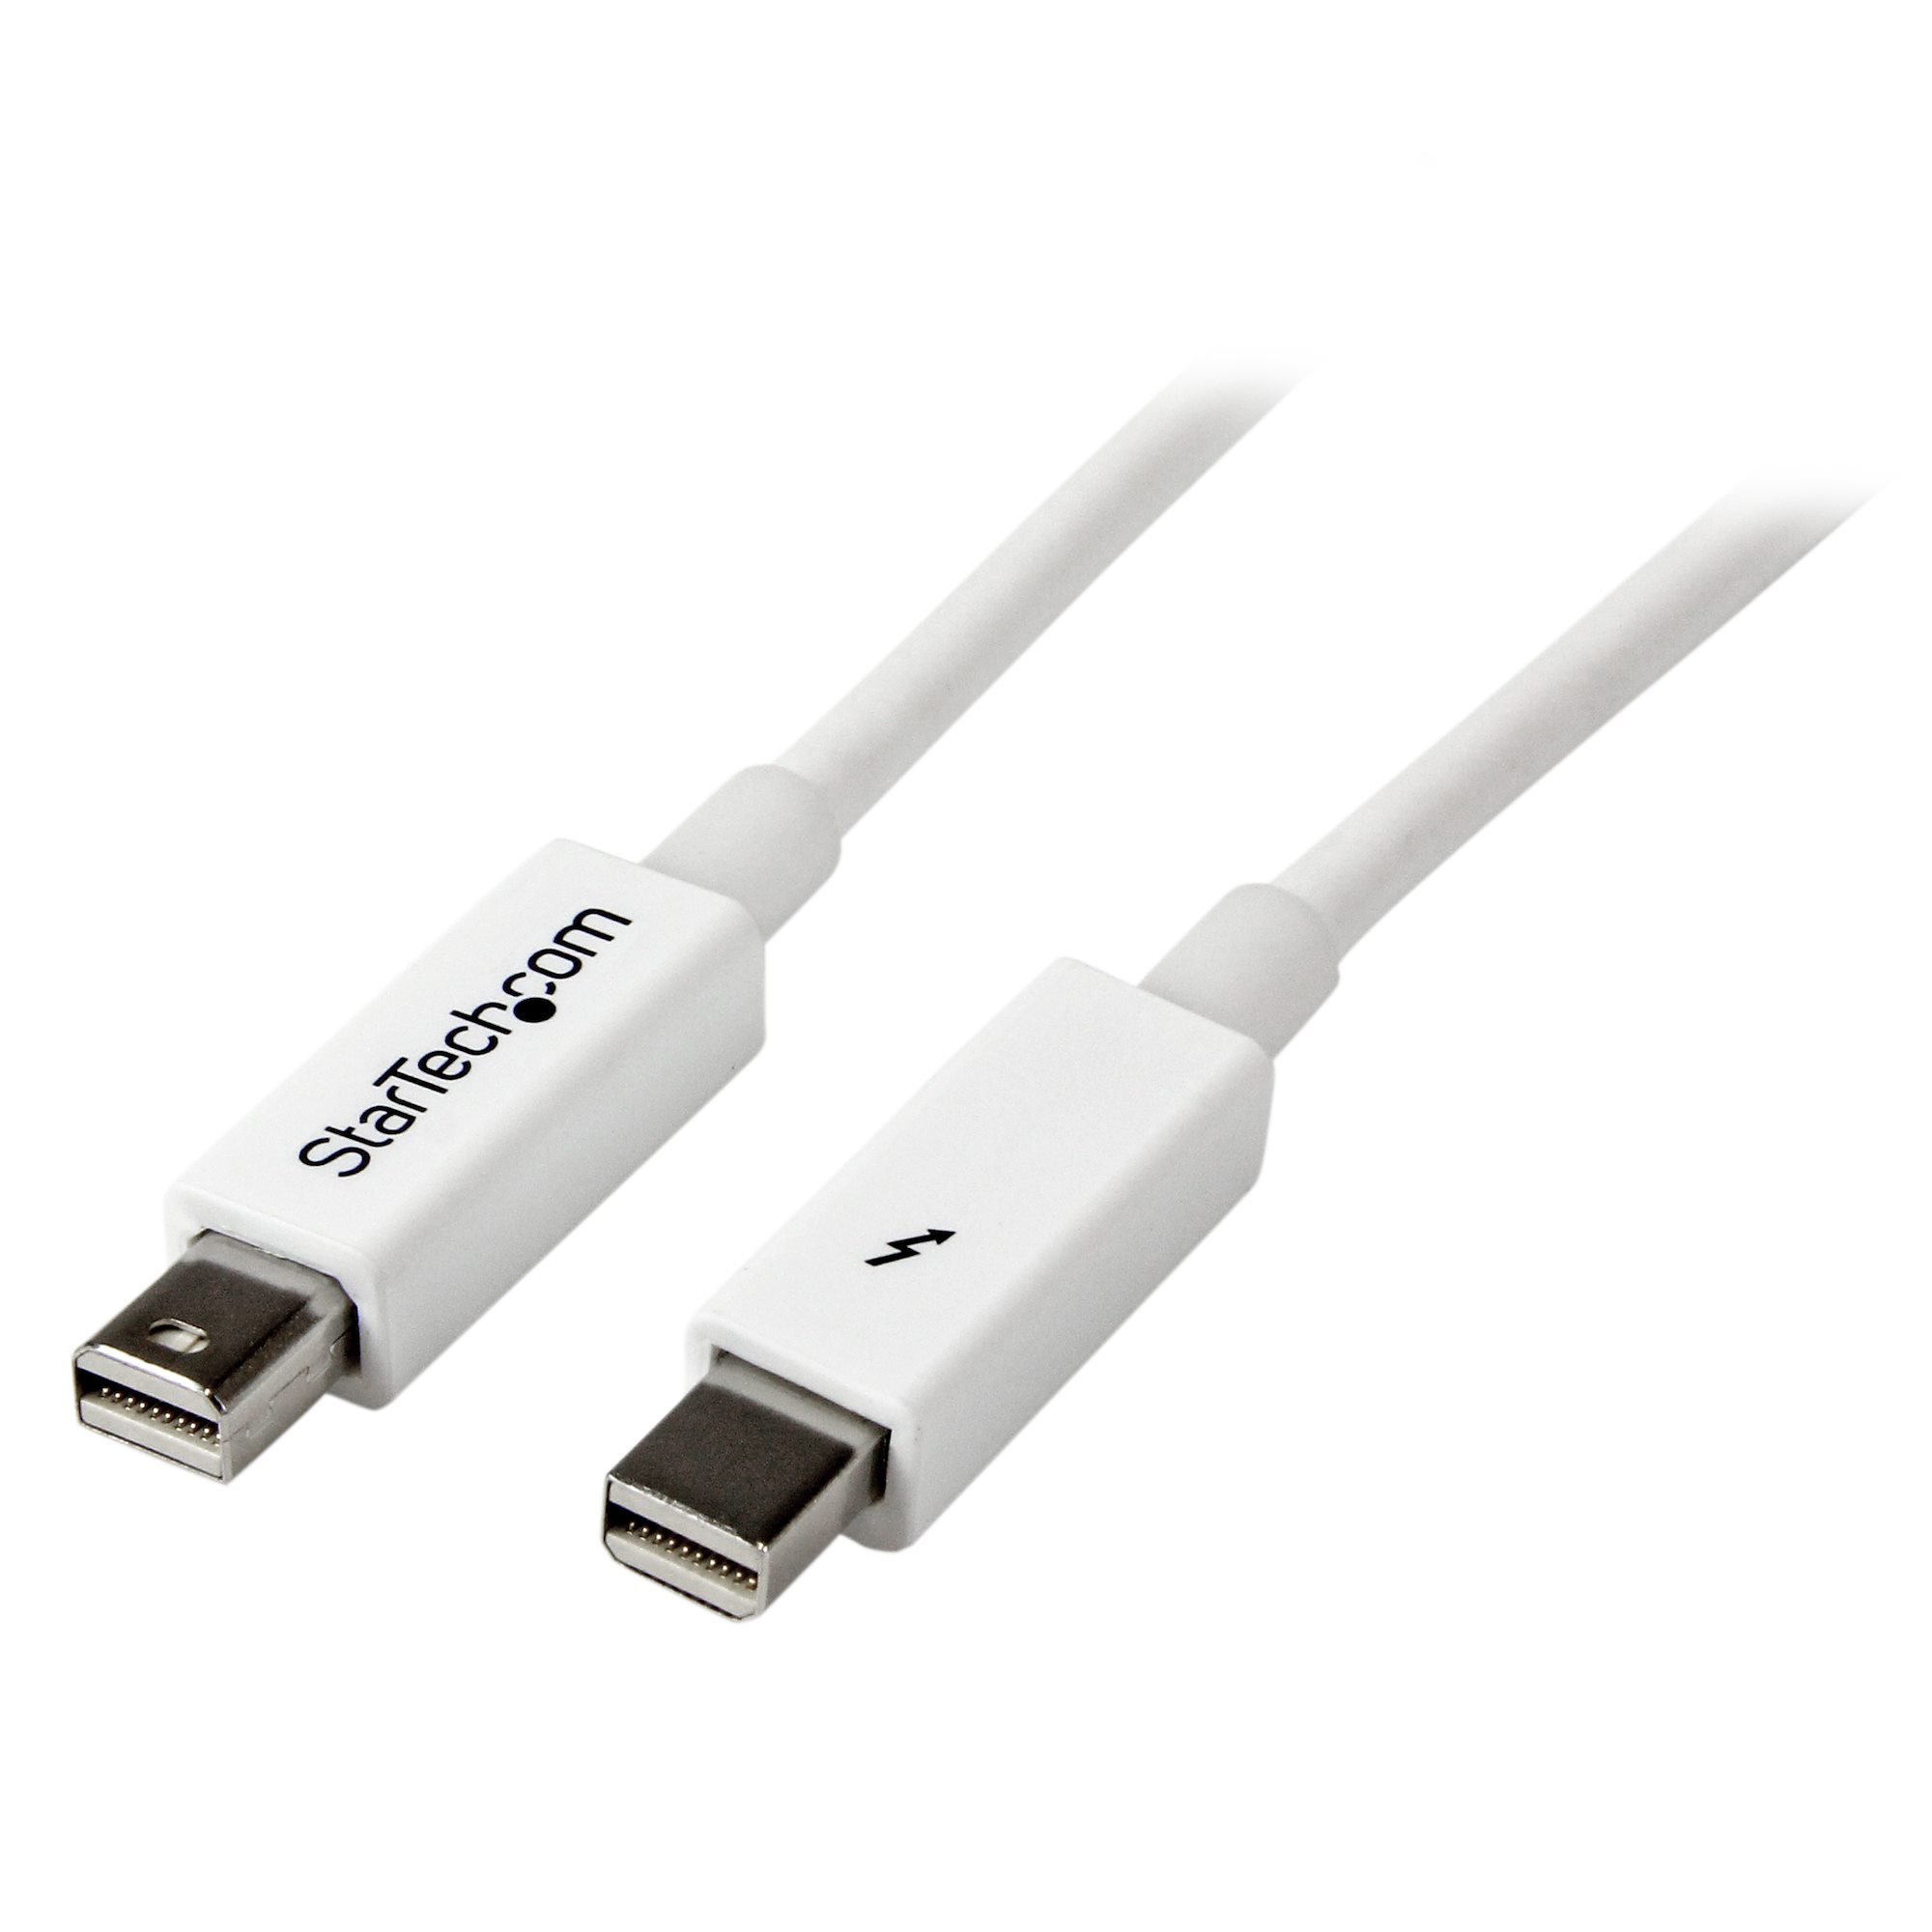 firewire to thunderbolt adapter problems